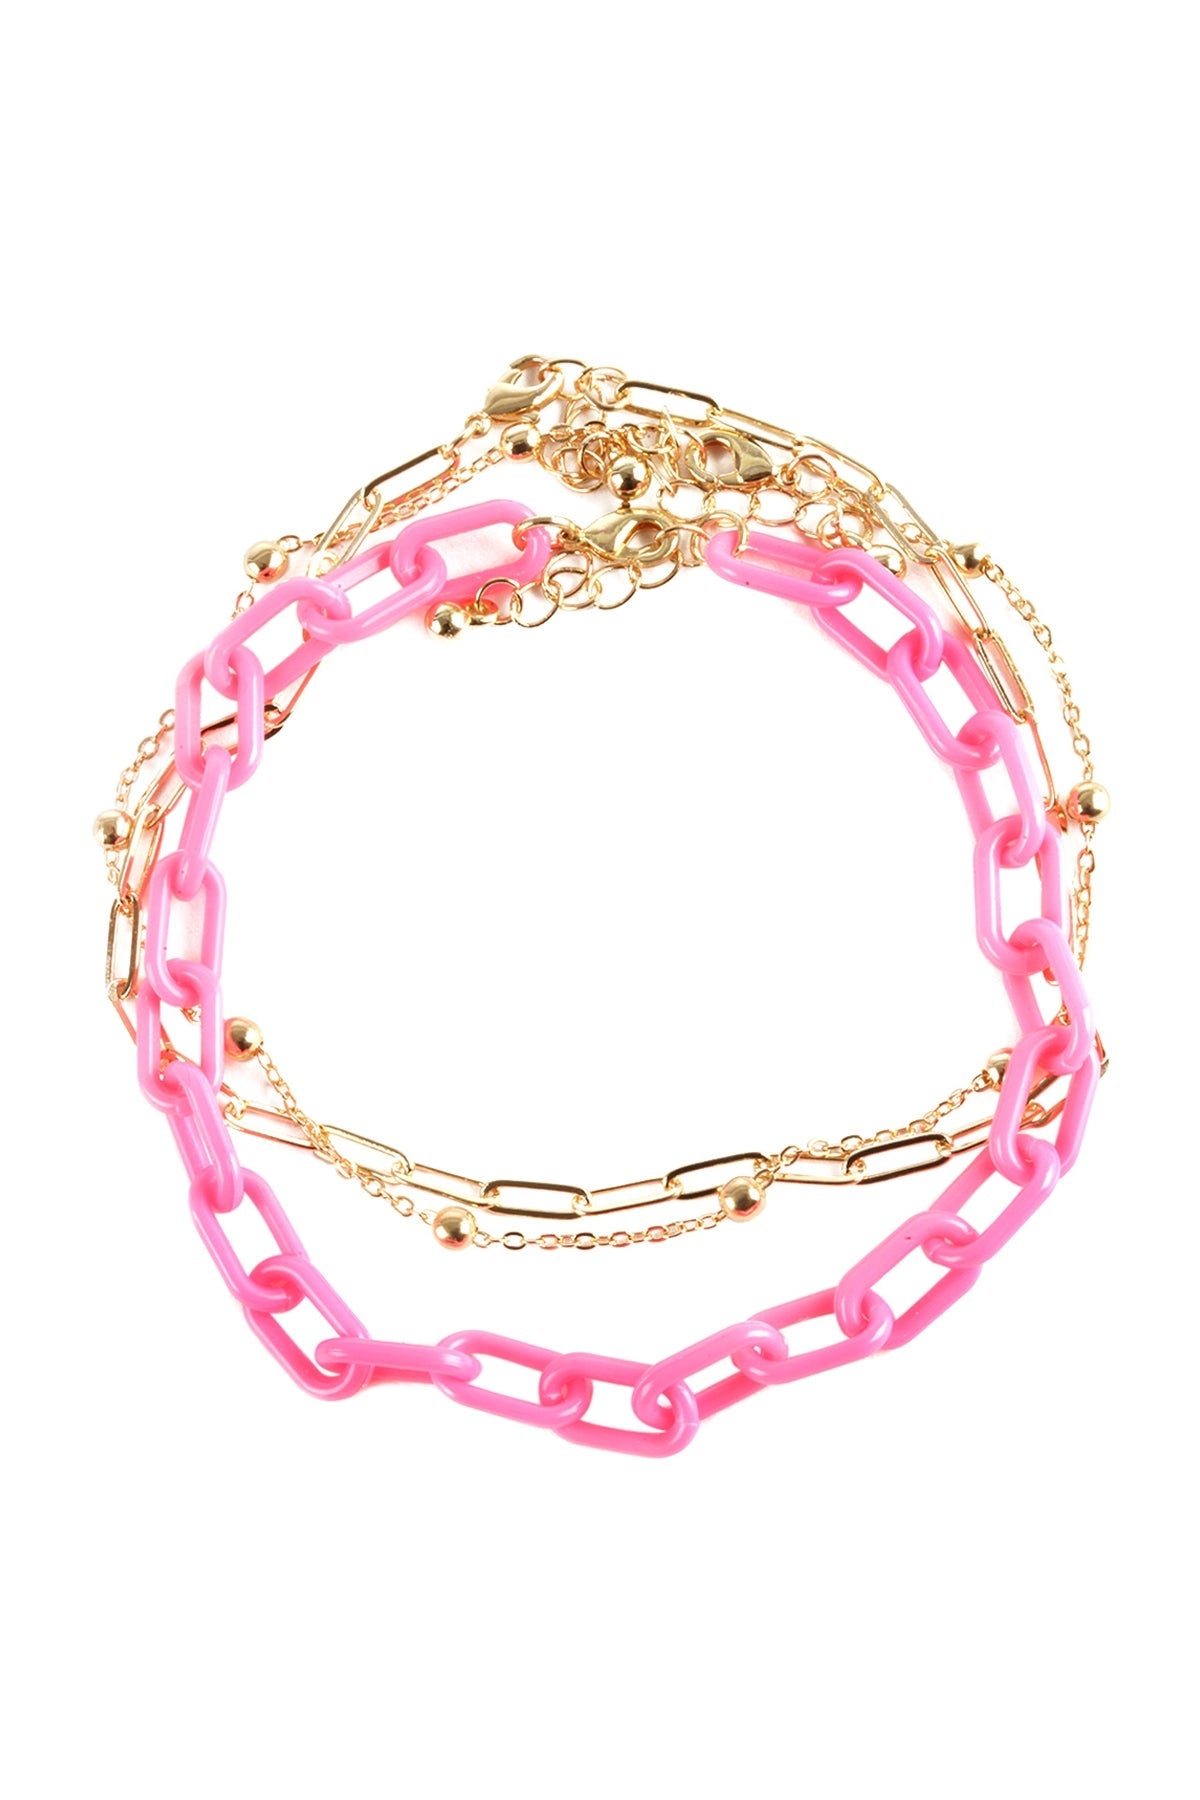 ACETATE METAL LINK STACKABLE MULTI CHAIN ANKLET (NOW $2.50 ONLY!)